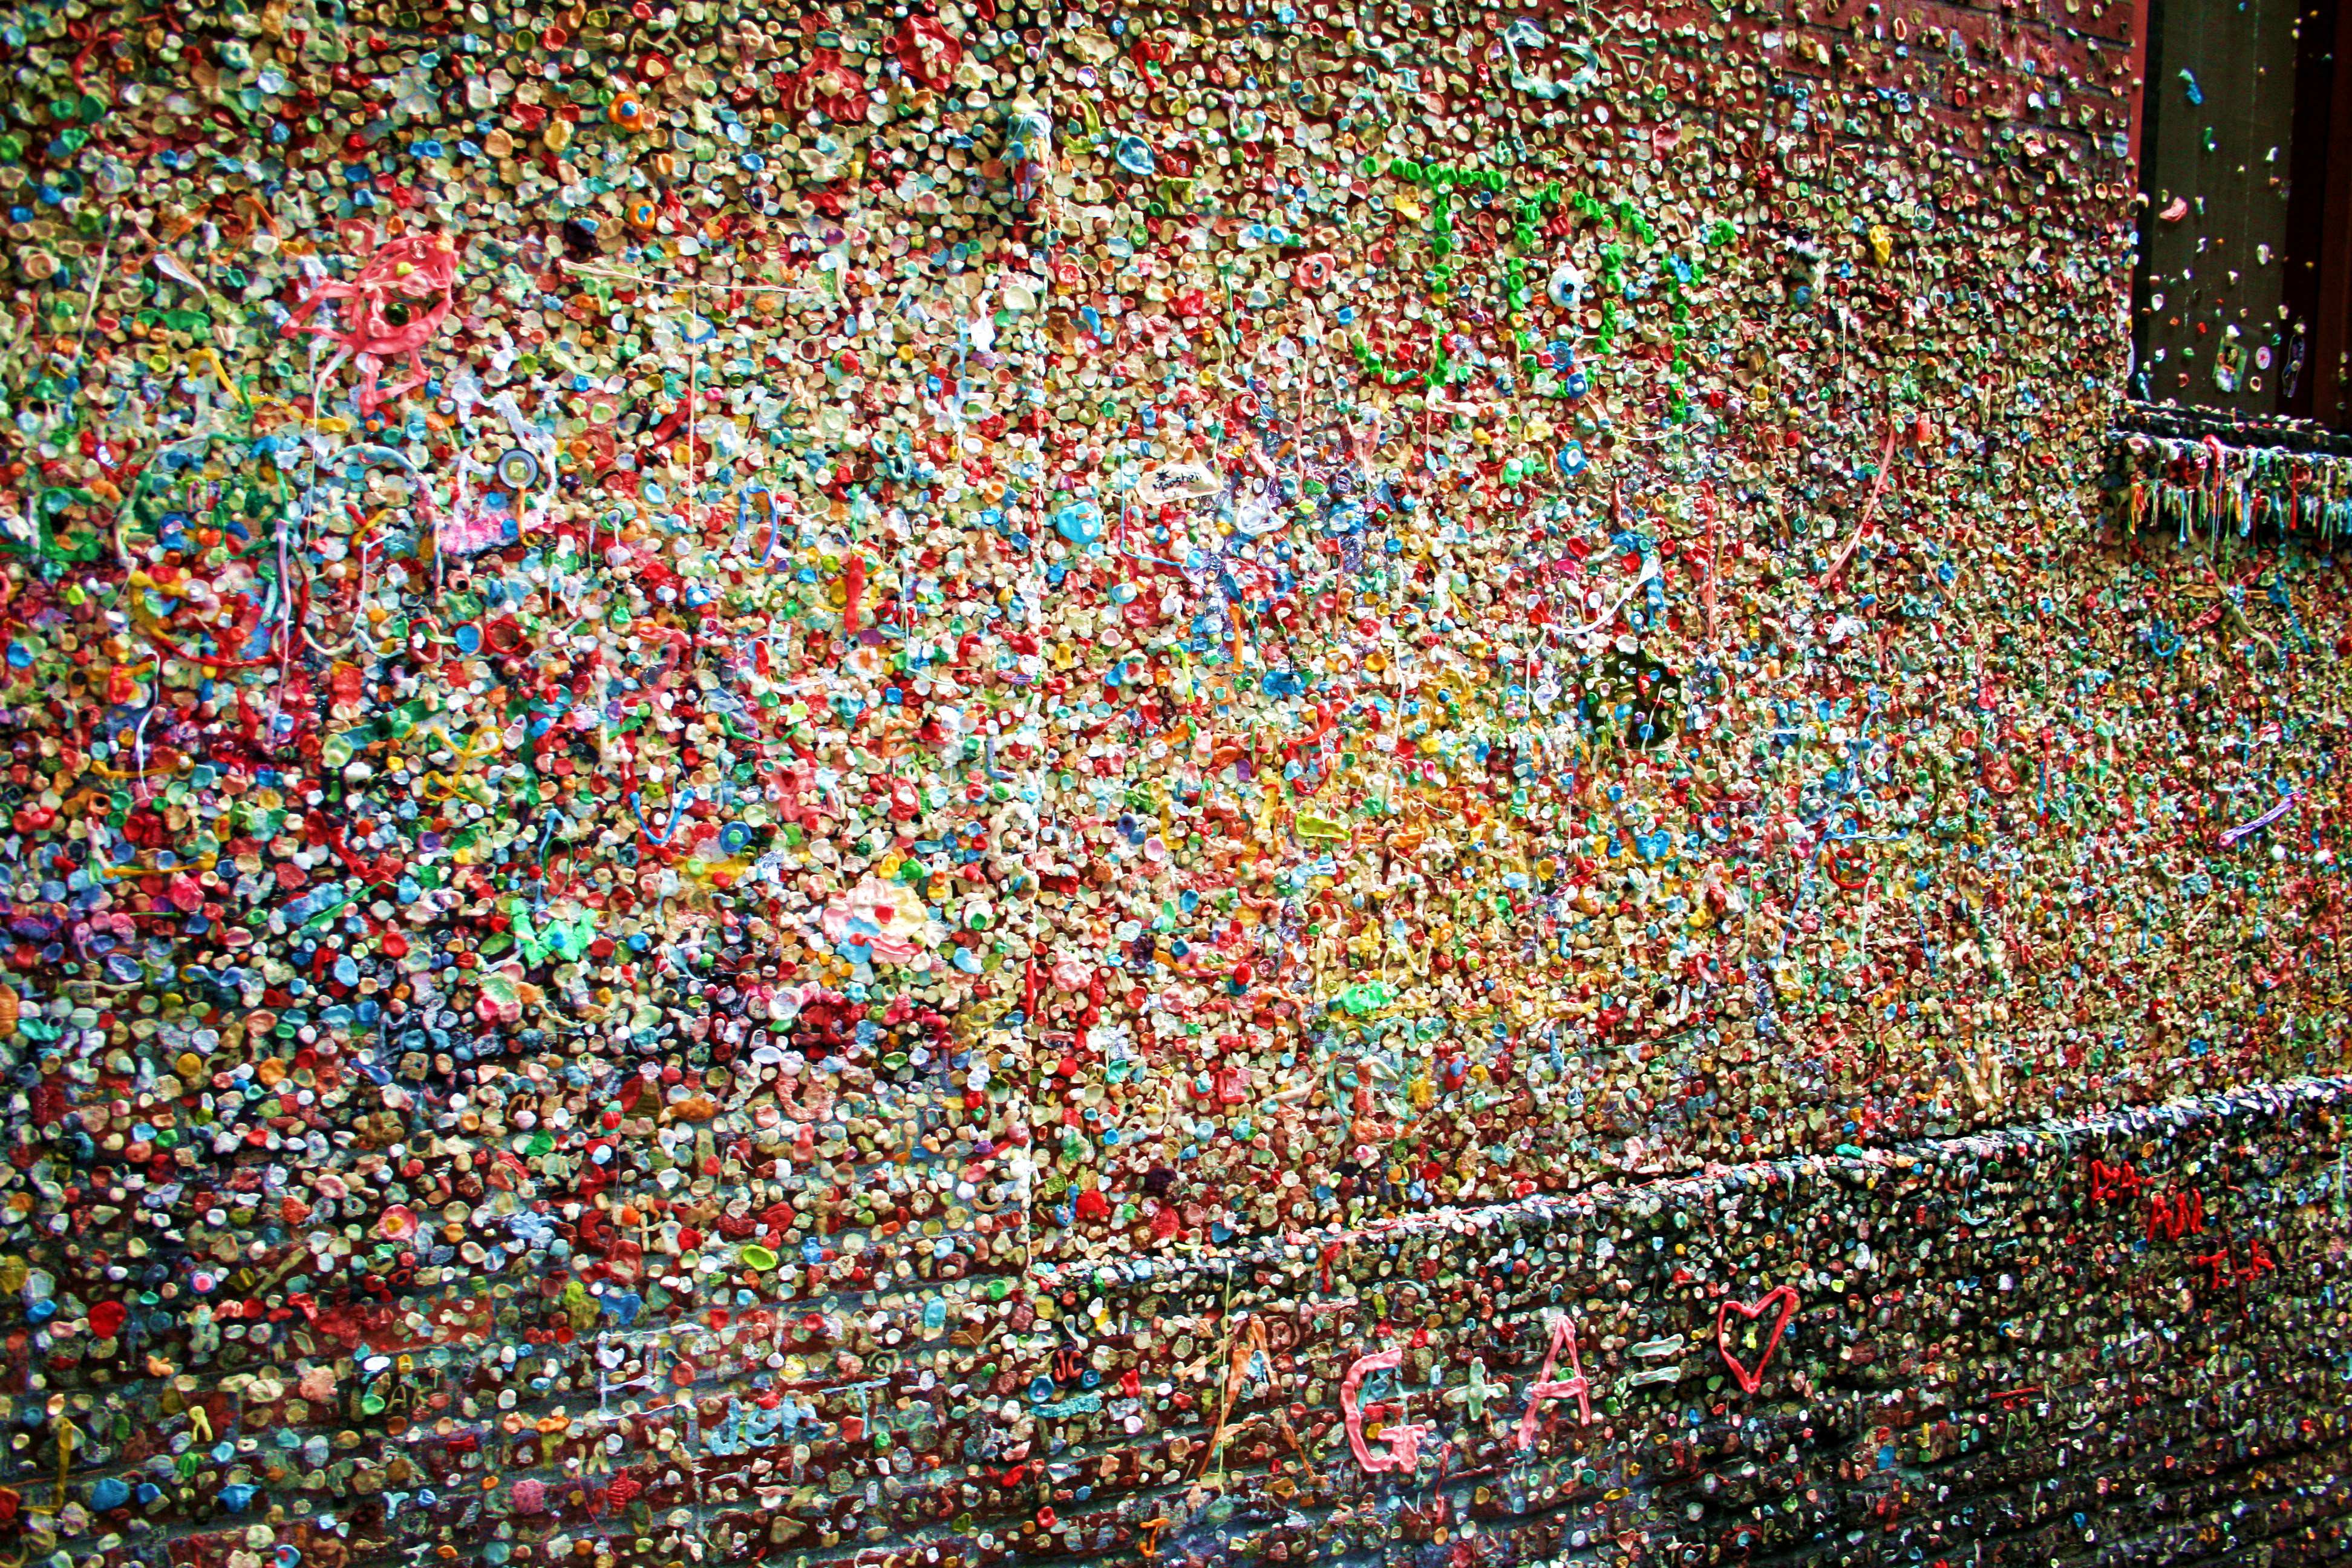 Tourists from all over the world have come to stick chewing gum to a wall on Post Alley near Pike Place Market in Seattle. (Barcroft Media&mdash; Getty Images)